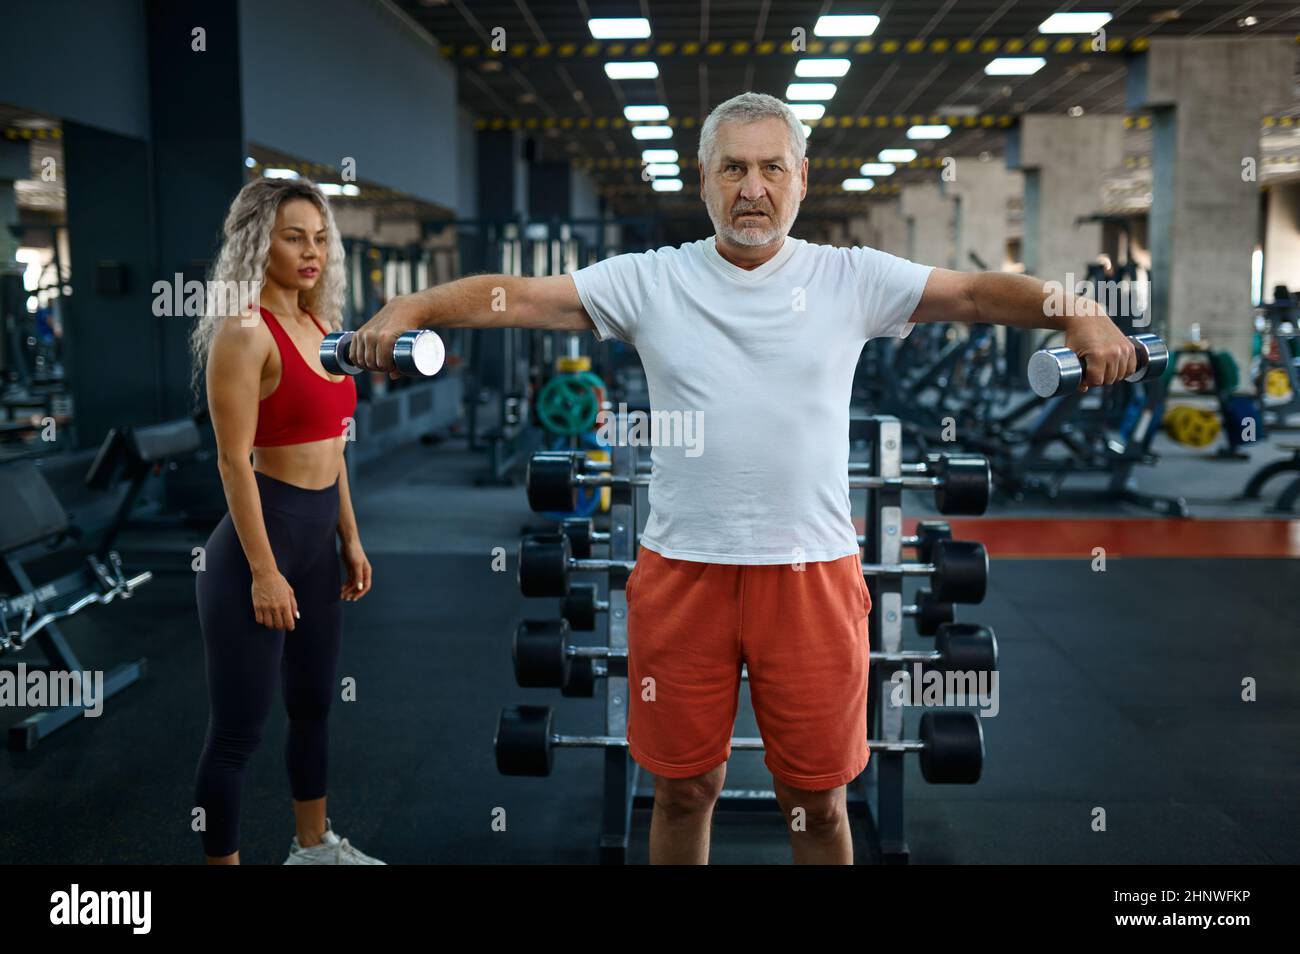 Old man doing exercise with dumbbells, female personal trainer, gym interior on background. Sportive grandpa with woman instructor, training in sport Stock Photo